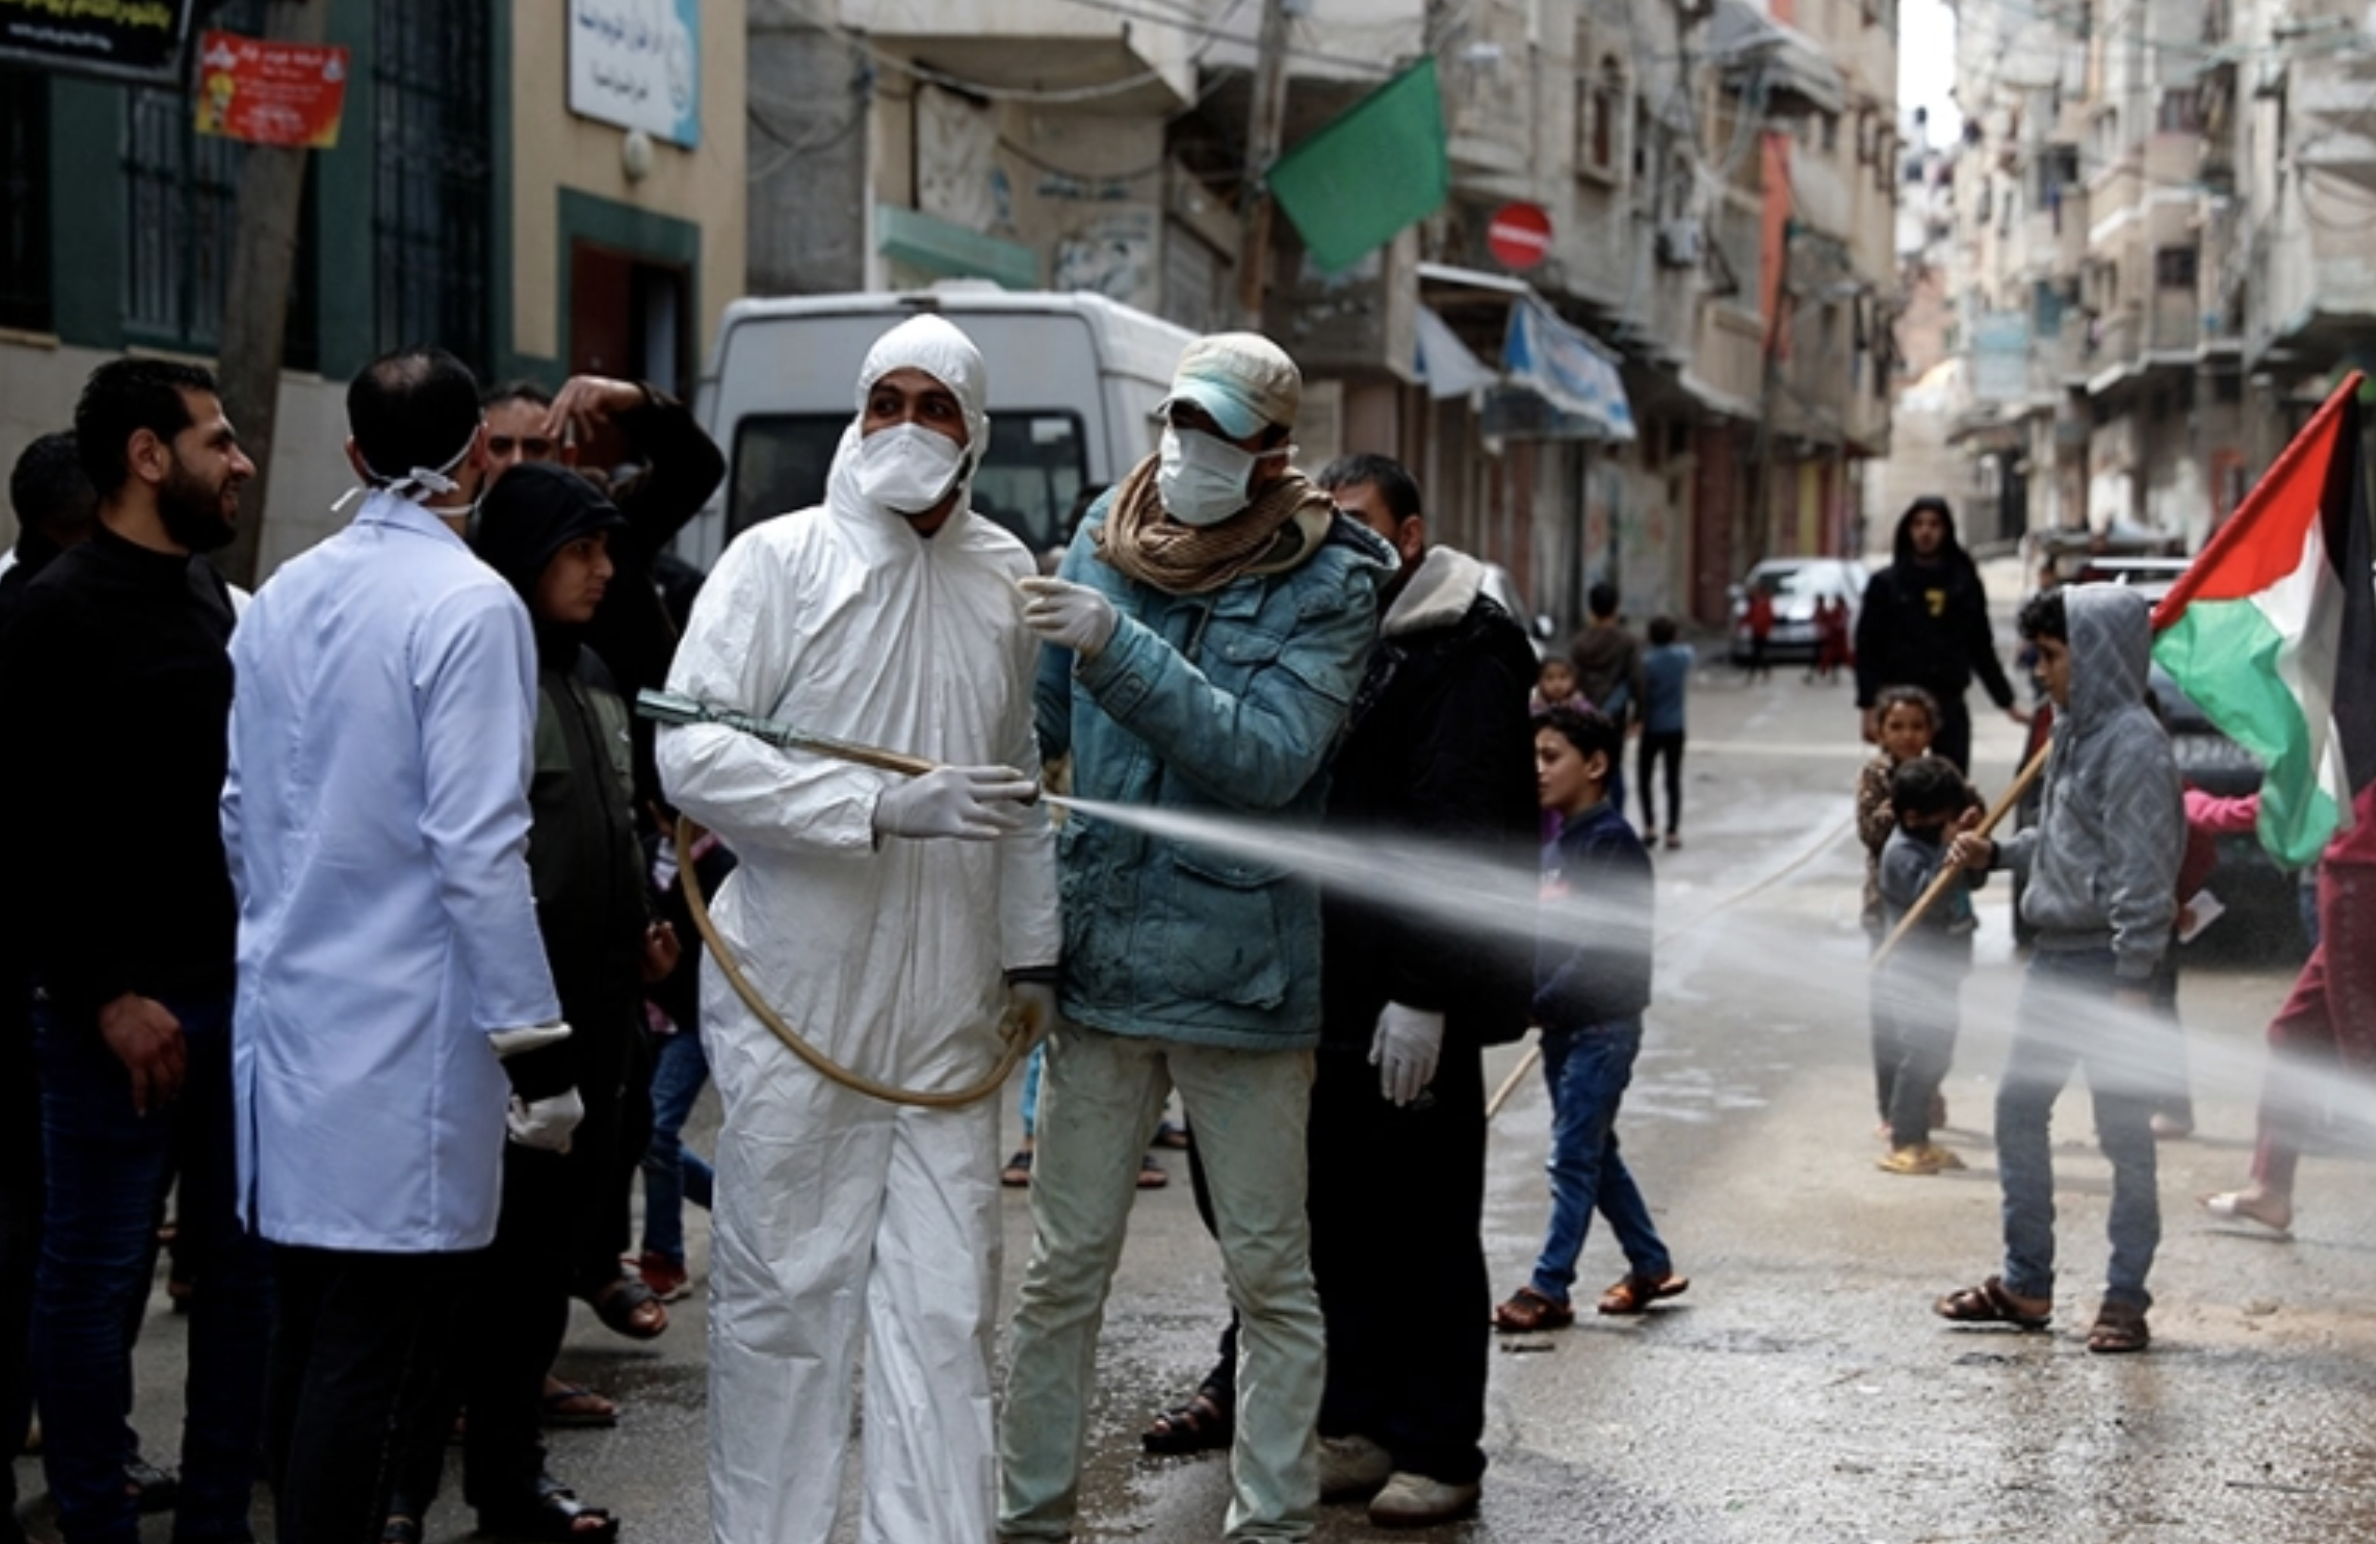 Men in hazardous material suits and surgical masks spray sanitizer in the crowded Gaza strip. a Boy with a Palestinian flag can be seen walking in the background.